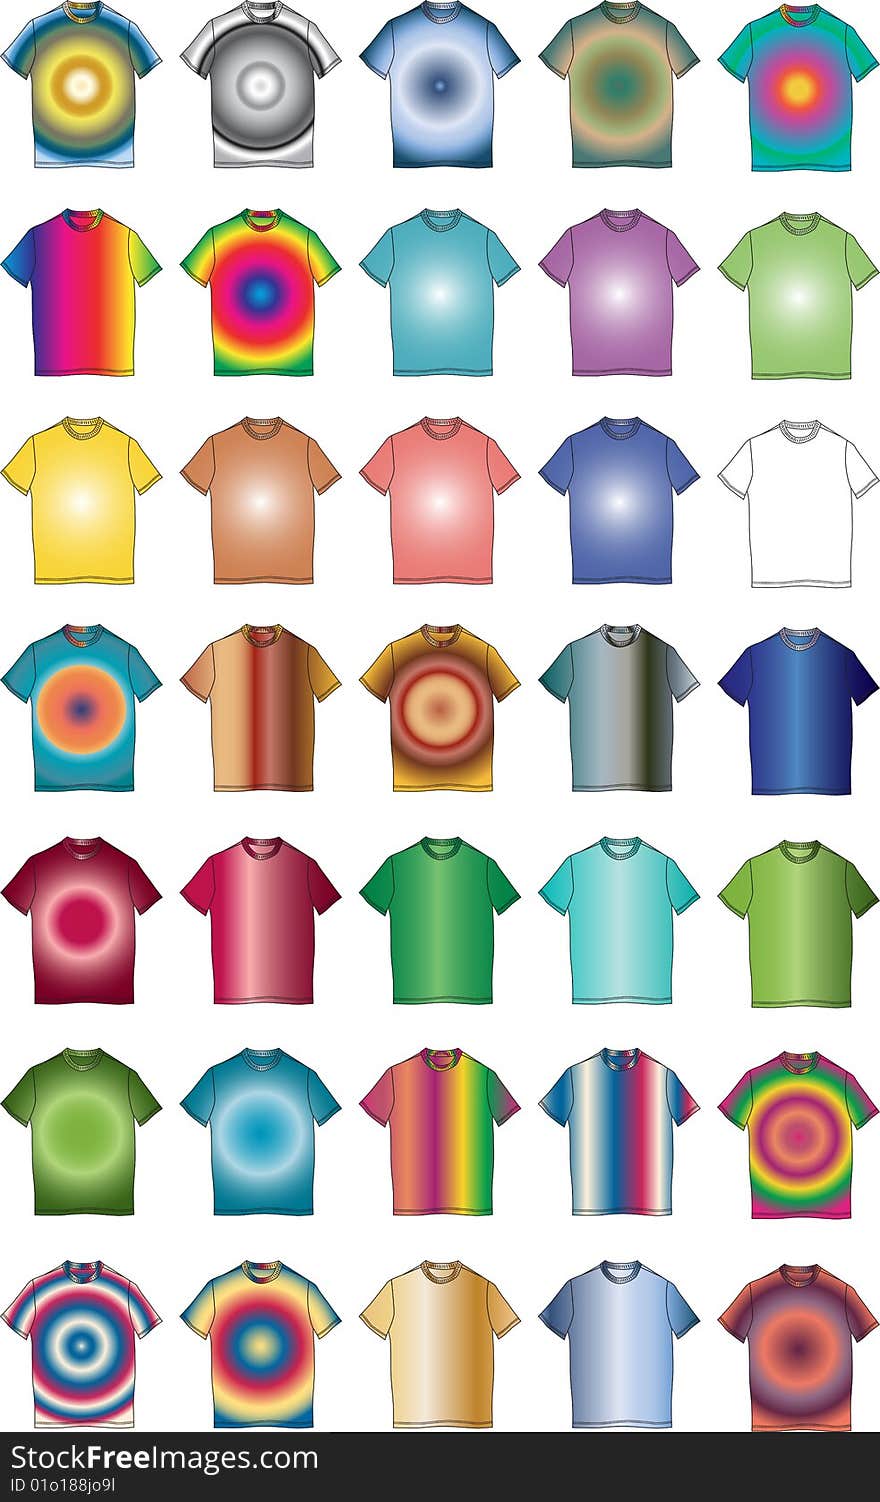 A shape of colorful t-shirts. A template of t-shirt as a vector illustration. A shape of clothes useful as an element of webpages, internet shops and shopping. A shape of colorful t-shirts. A template of t-shirt as a vector illustration. A shape of clothes useful as an element of webpages, internet shops and shopping.